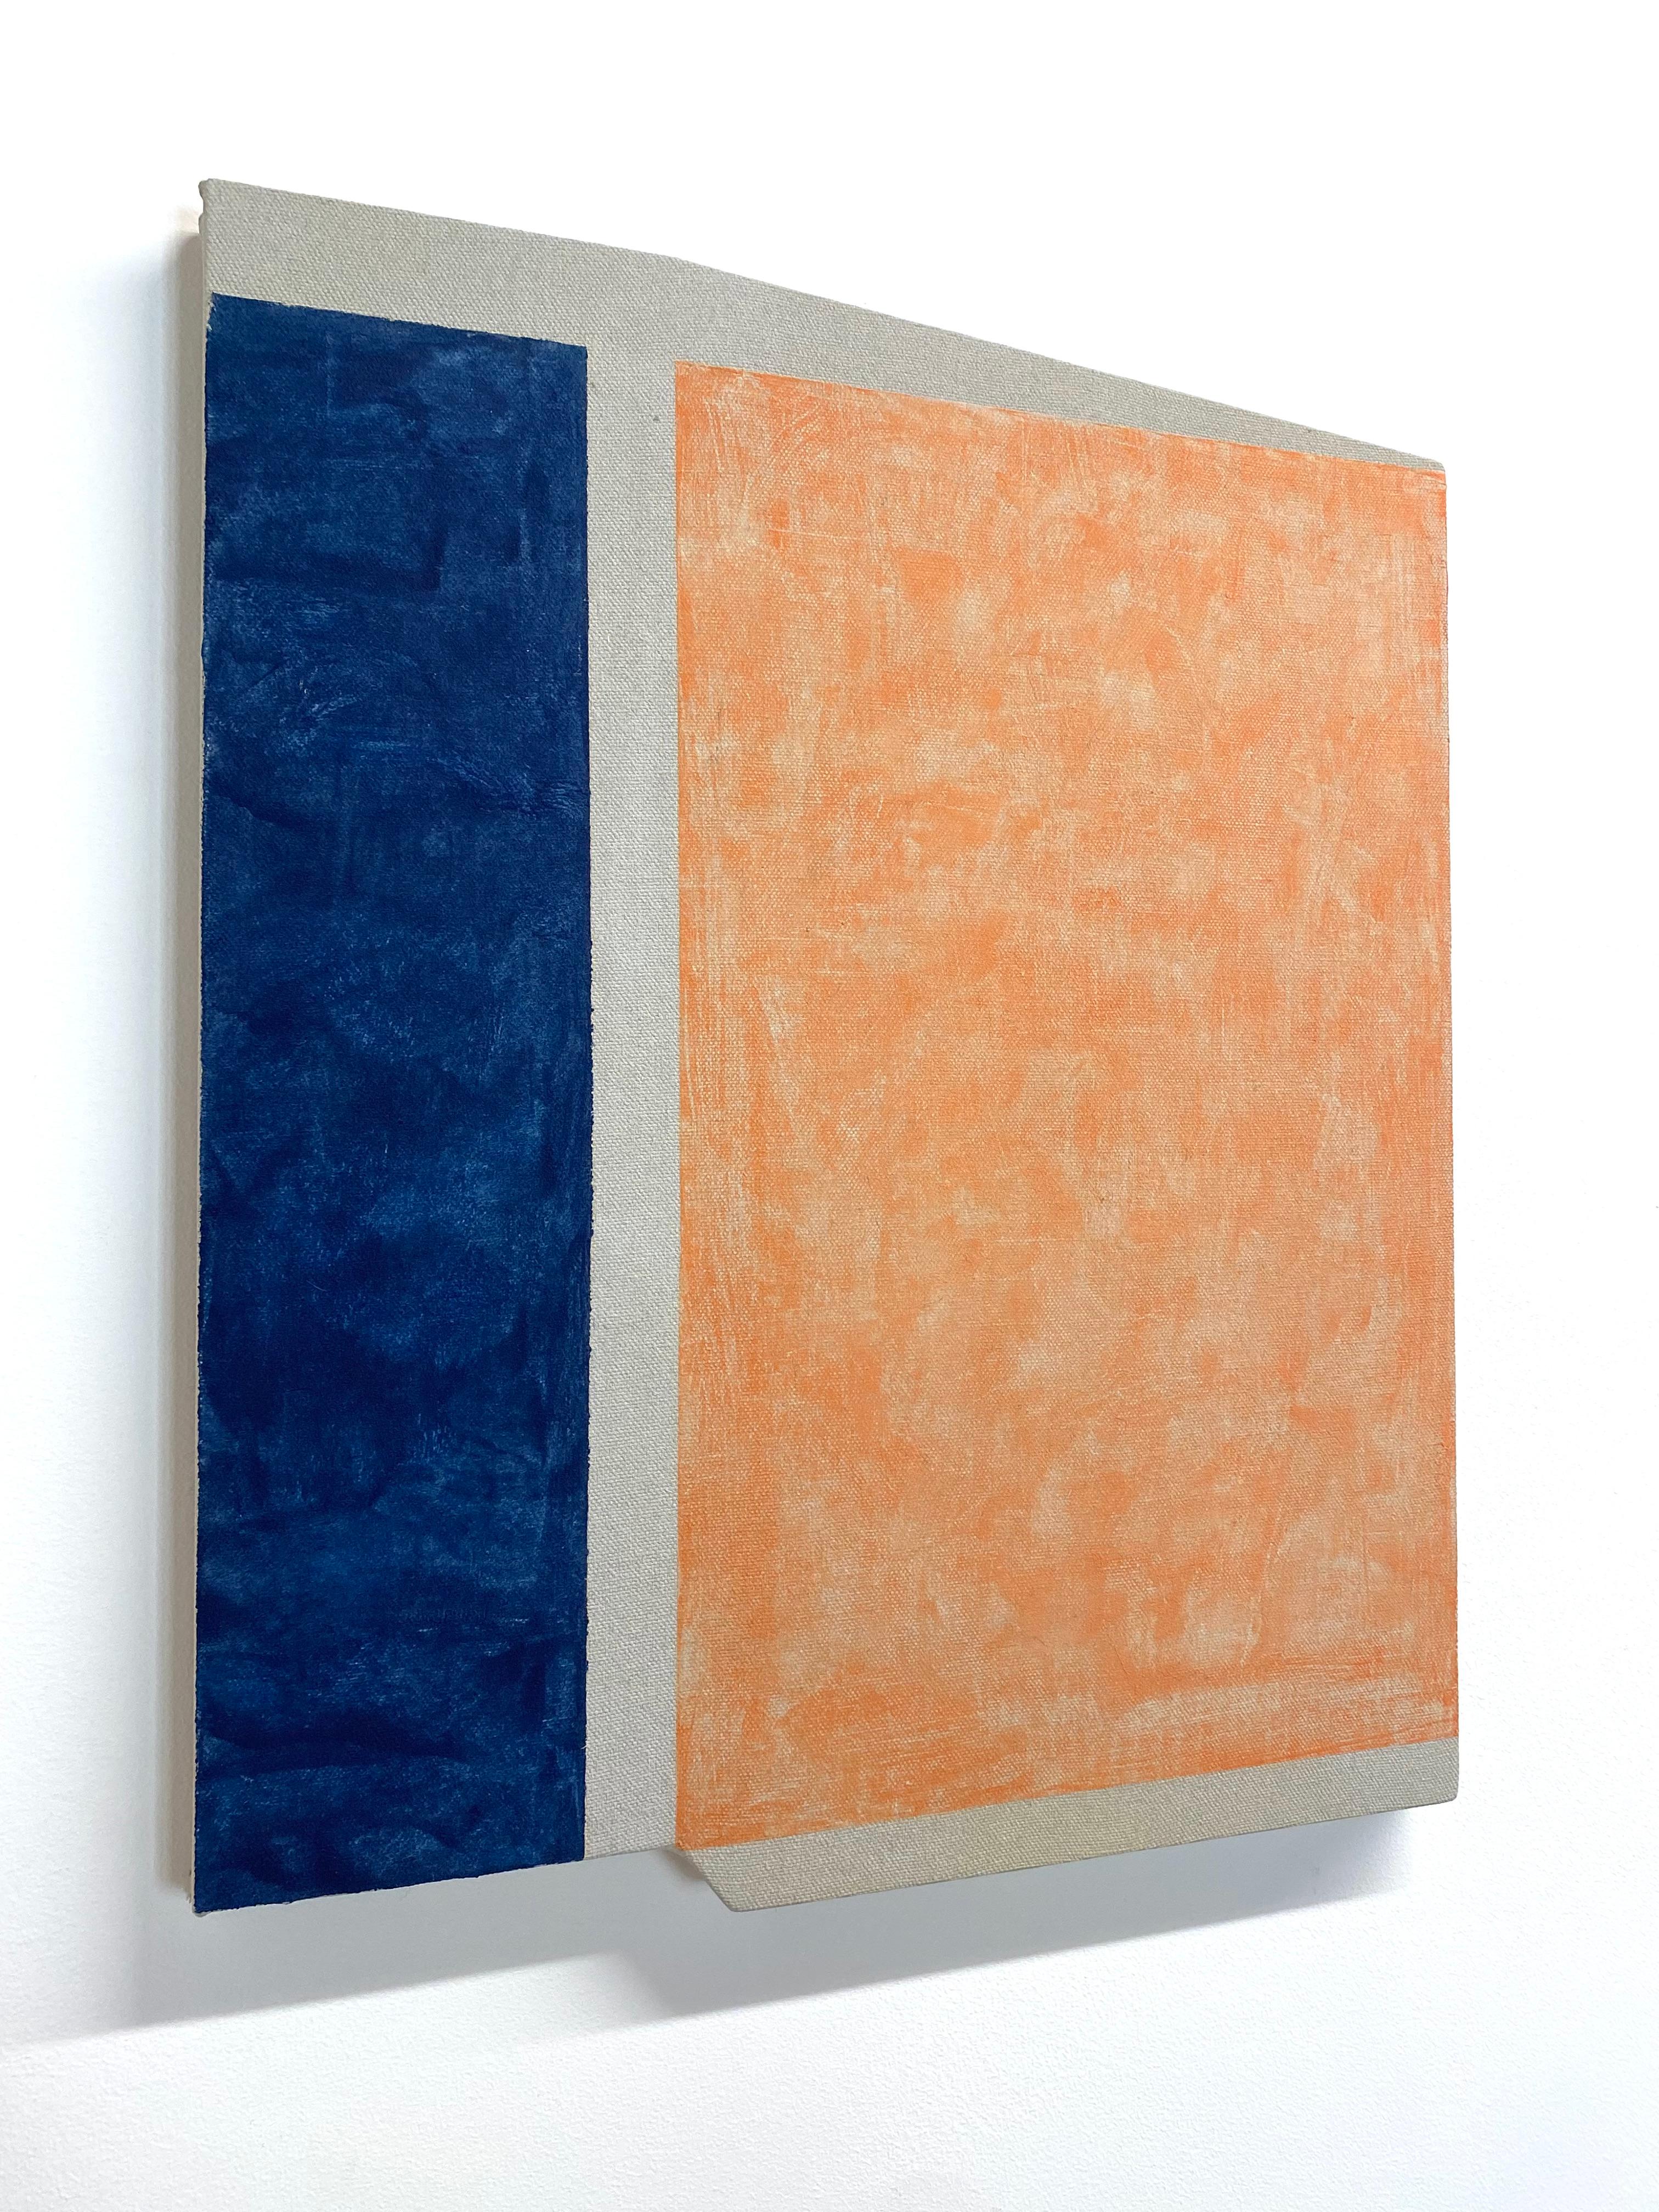 F30, Apricot Orange, Dark Lapis Blue, Geometric Abstract Shaped Panel Painting For Sale 6